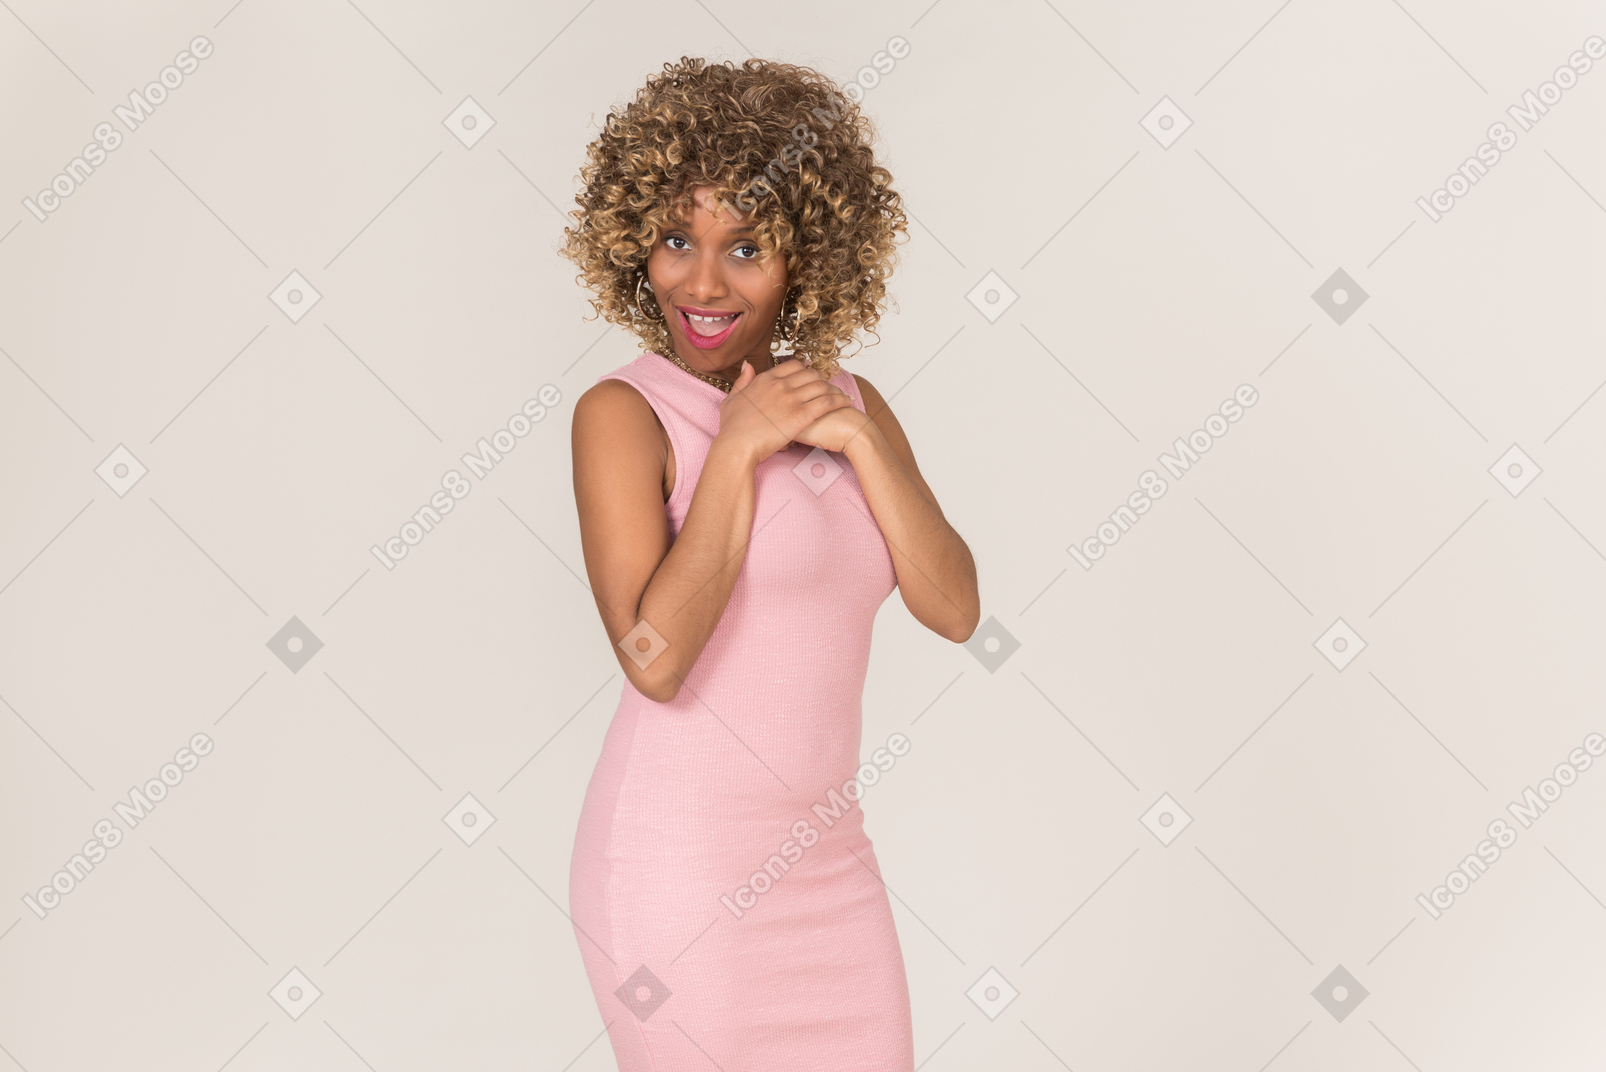 A young black fluffy-haired woman in a pastel pink dress, having fun alone against a plain grey background